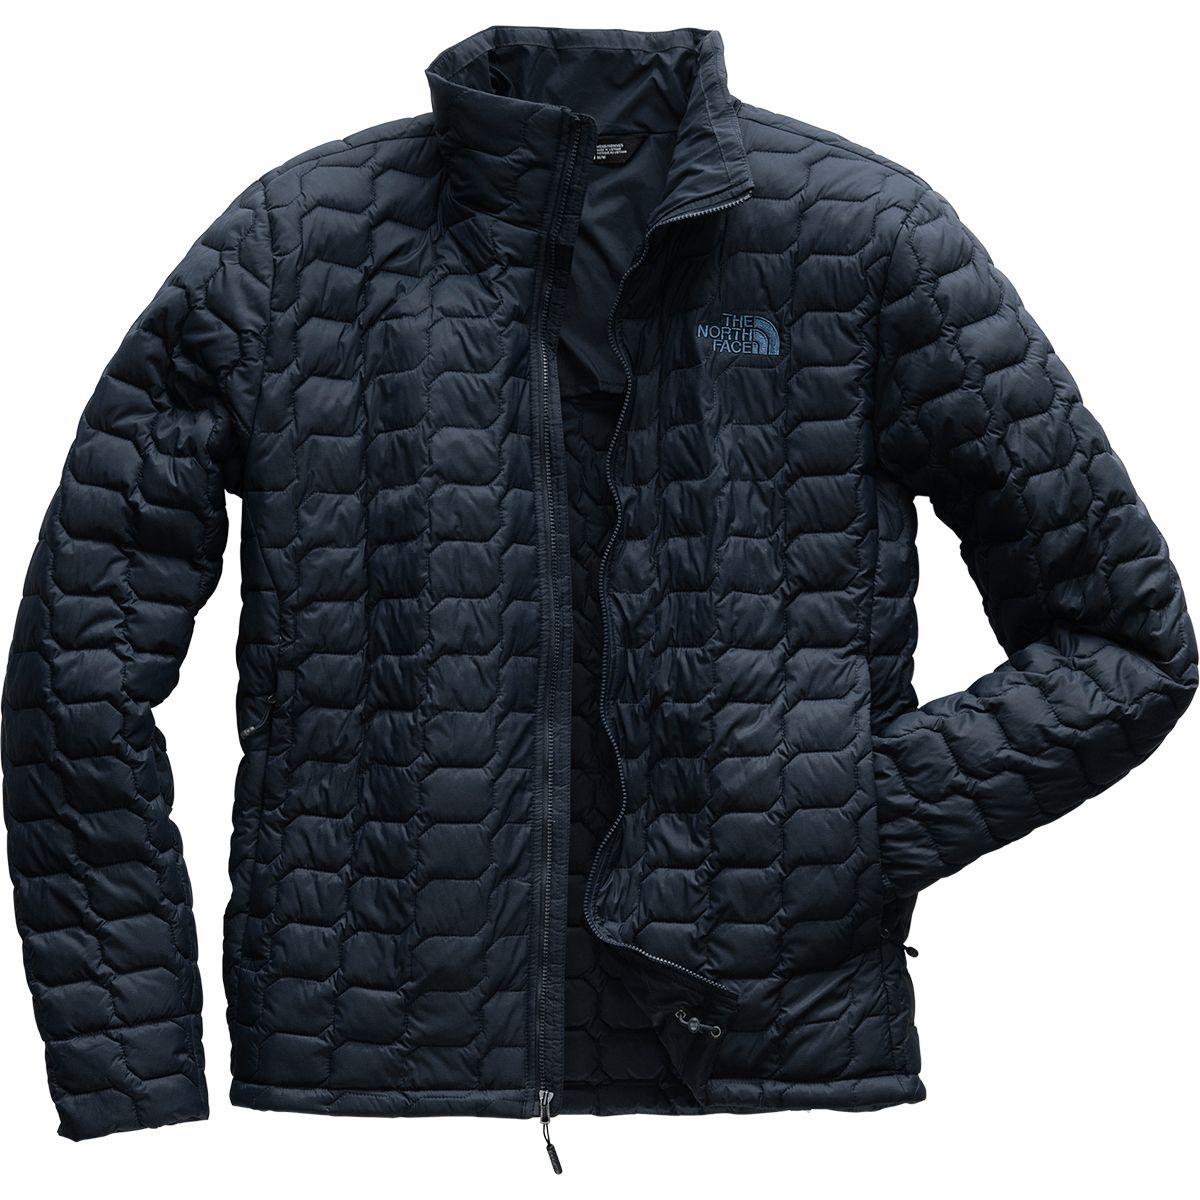 clean up Pillar feasible The North Face Thermoball Insulated Sale, 53% OFF | blountpartnership.com